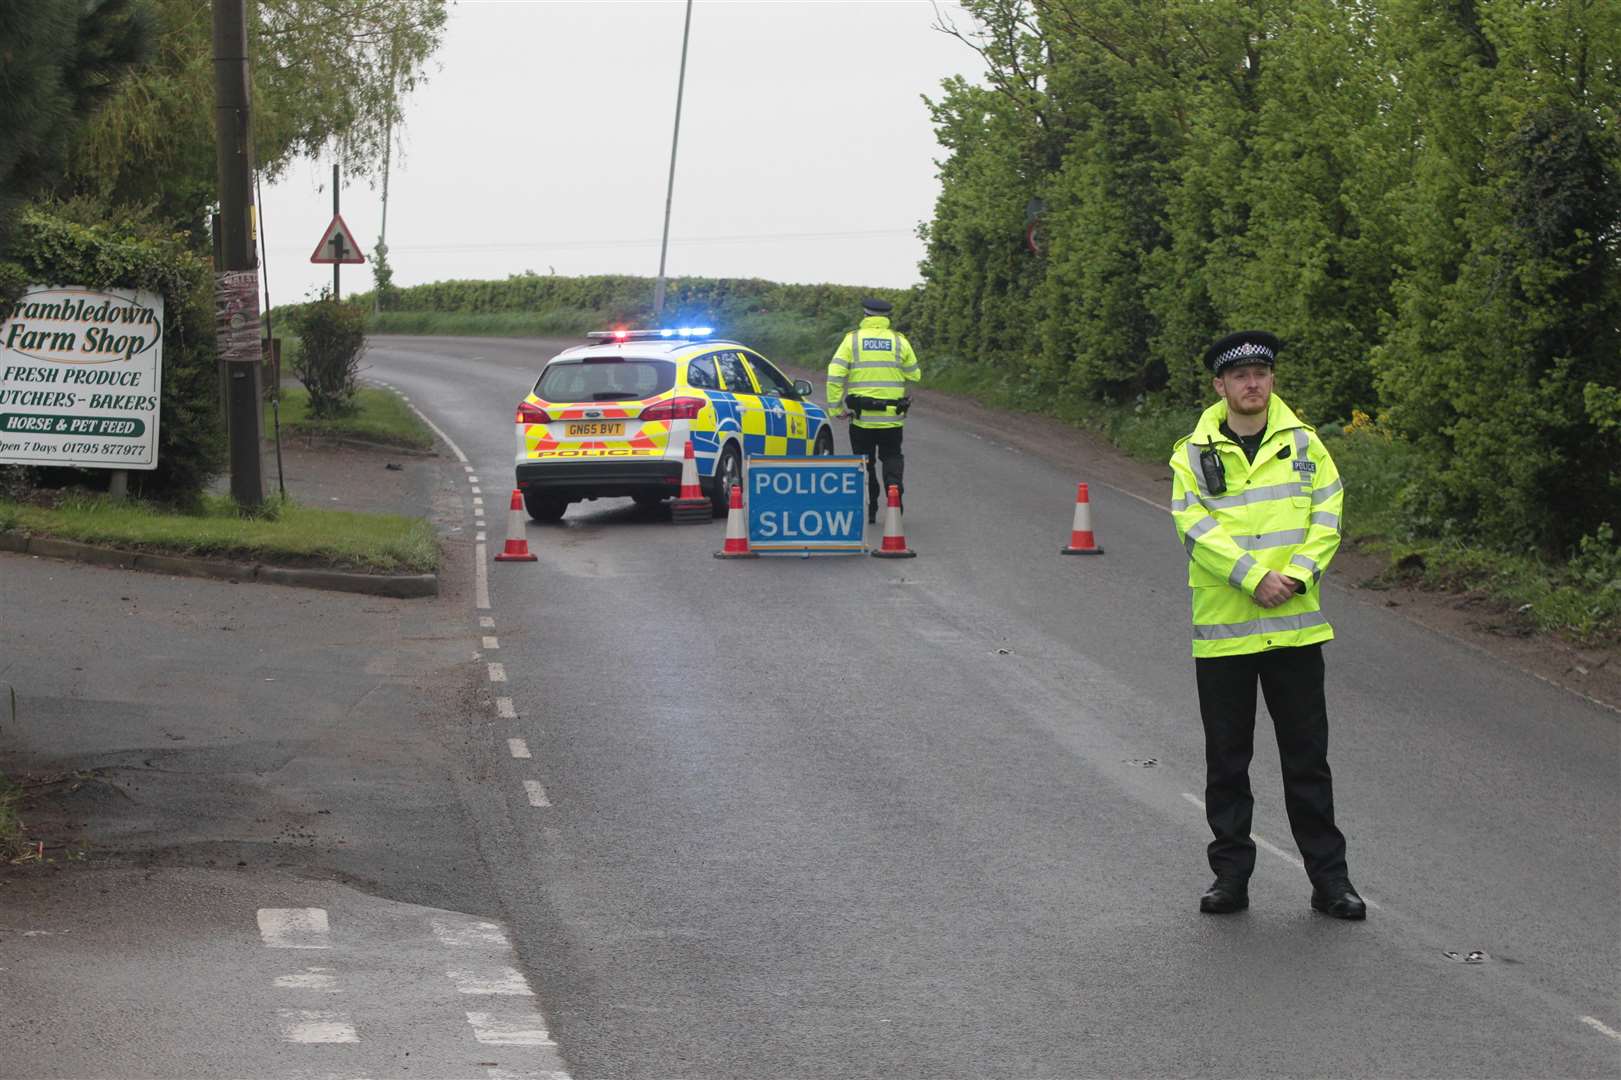 Police stop traffic along the Lower Sheppey road, near Brambledown Farm Shop, because of an accident over the brow of the hill